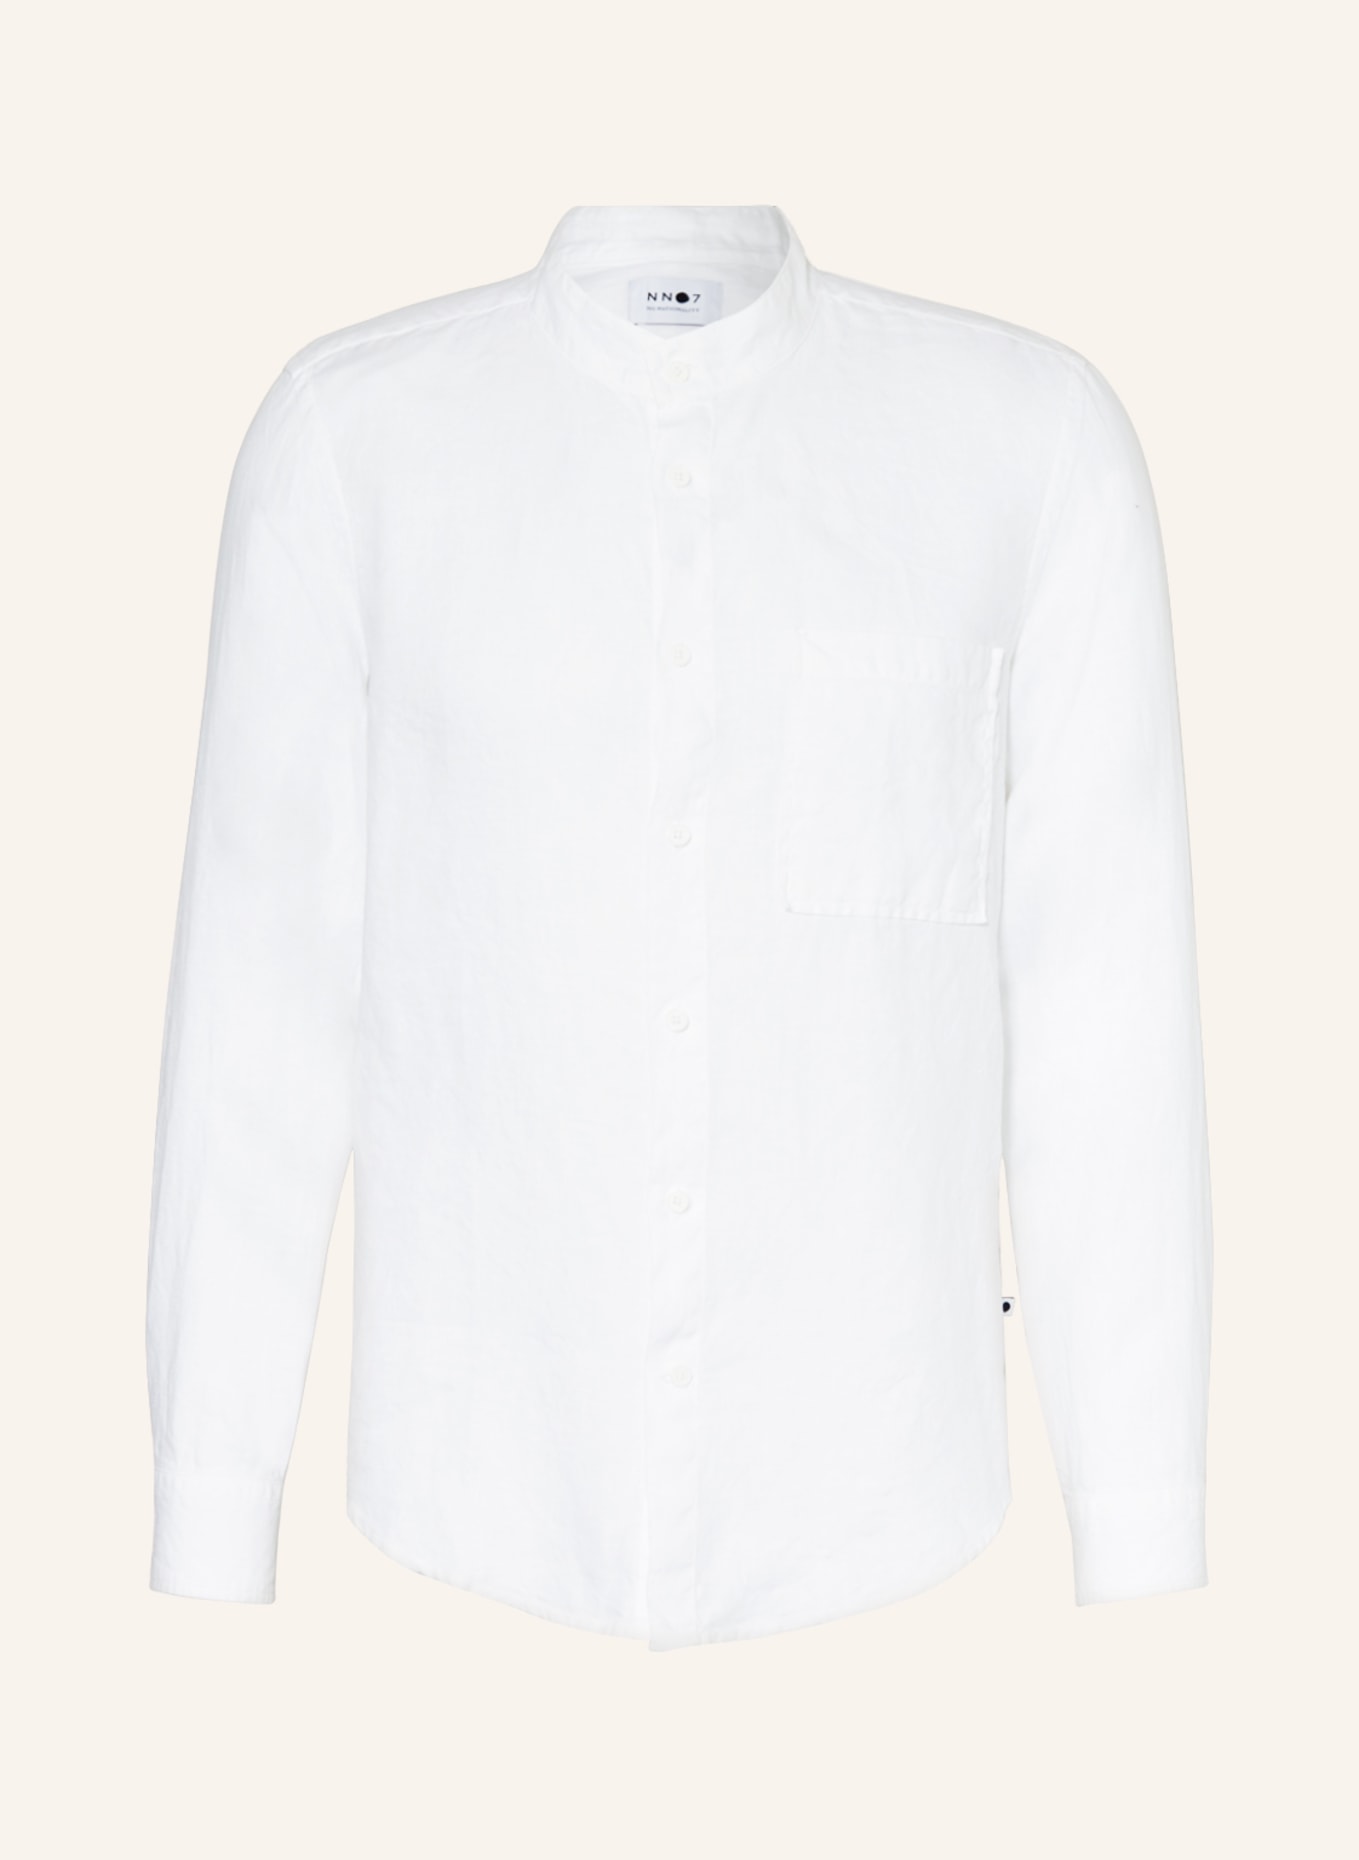 NN.07 Linen shirt EDDIE regular fit with stand-up collar, Color: WHITE (Image 1)